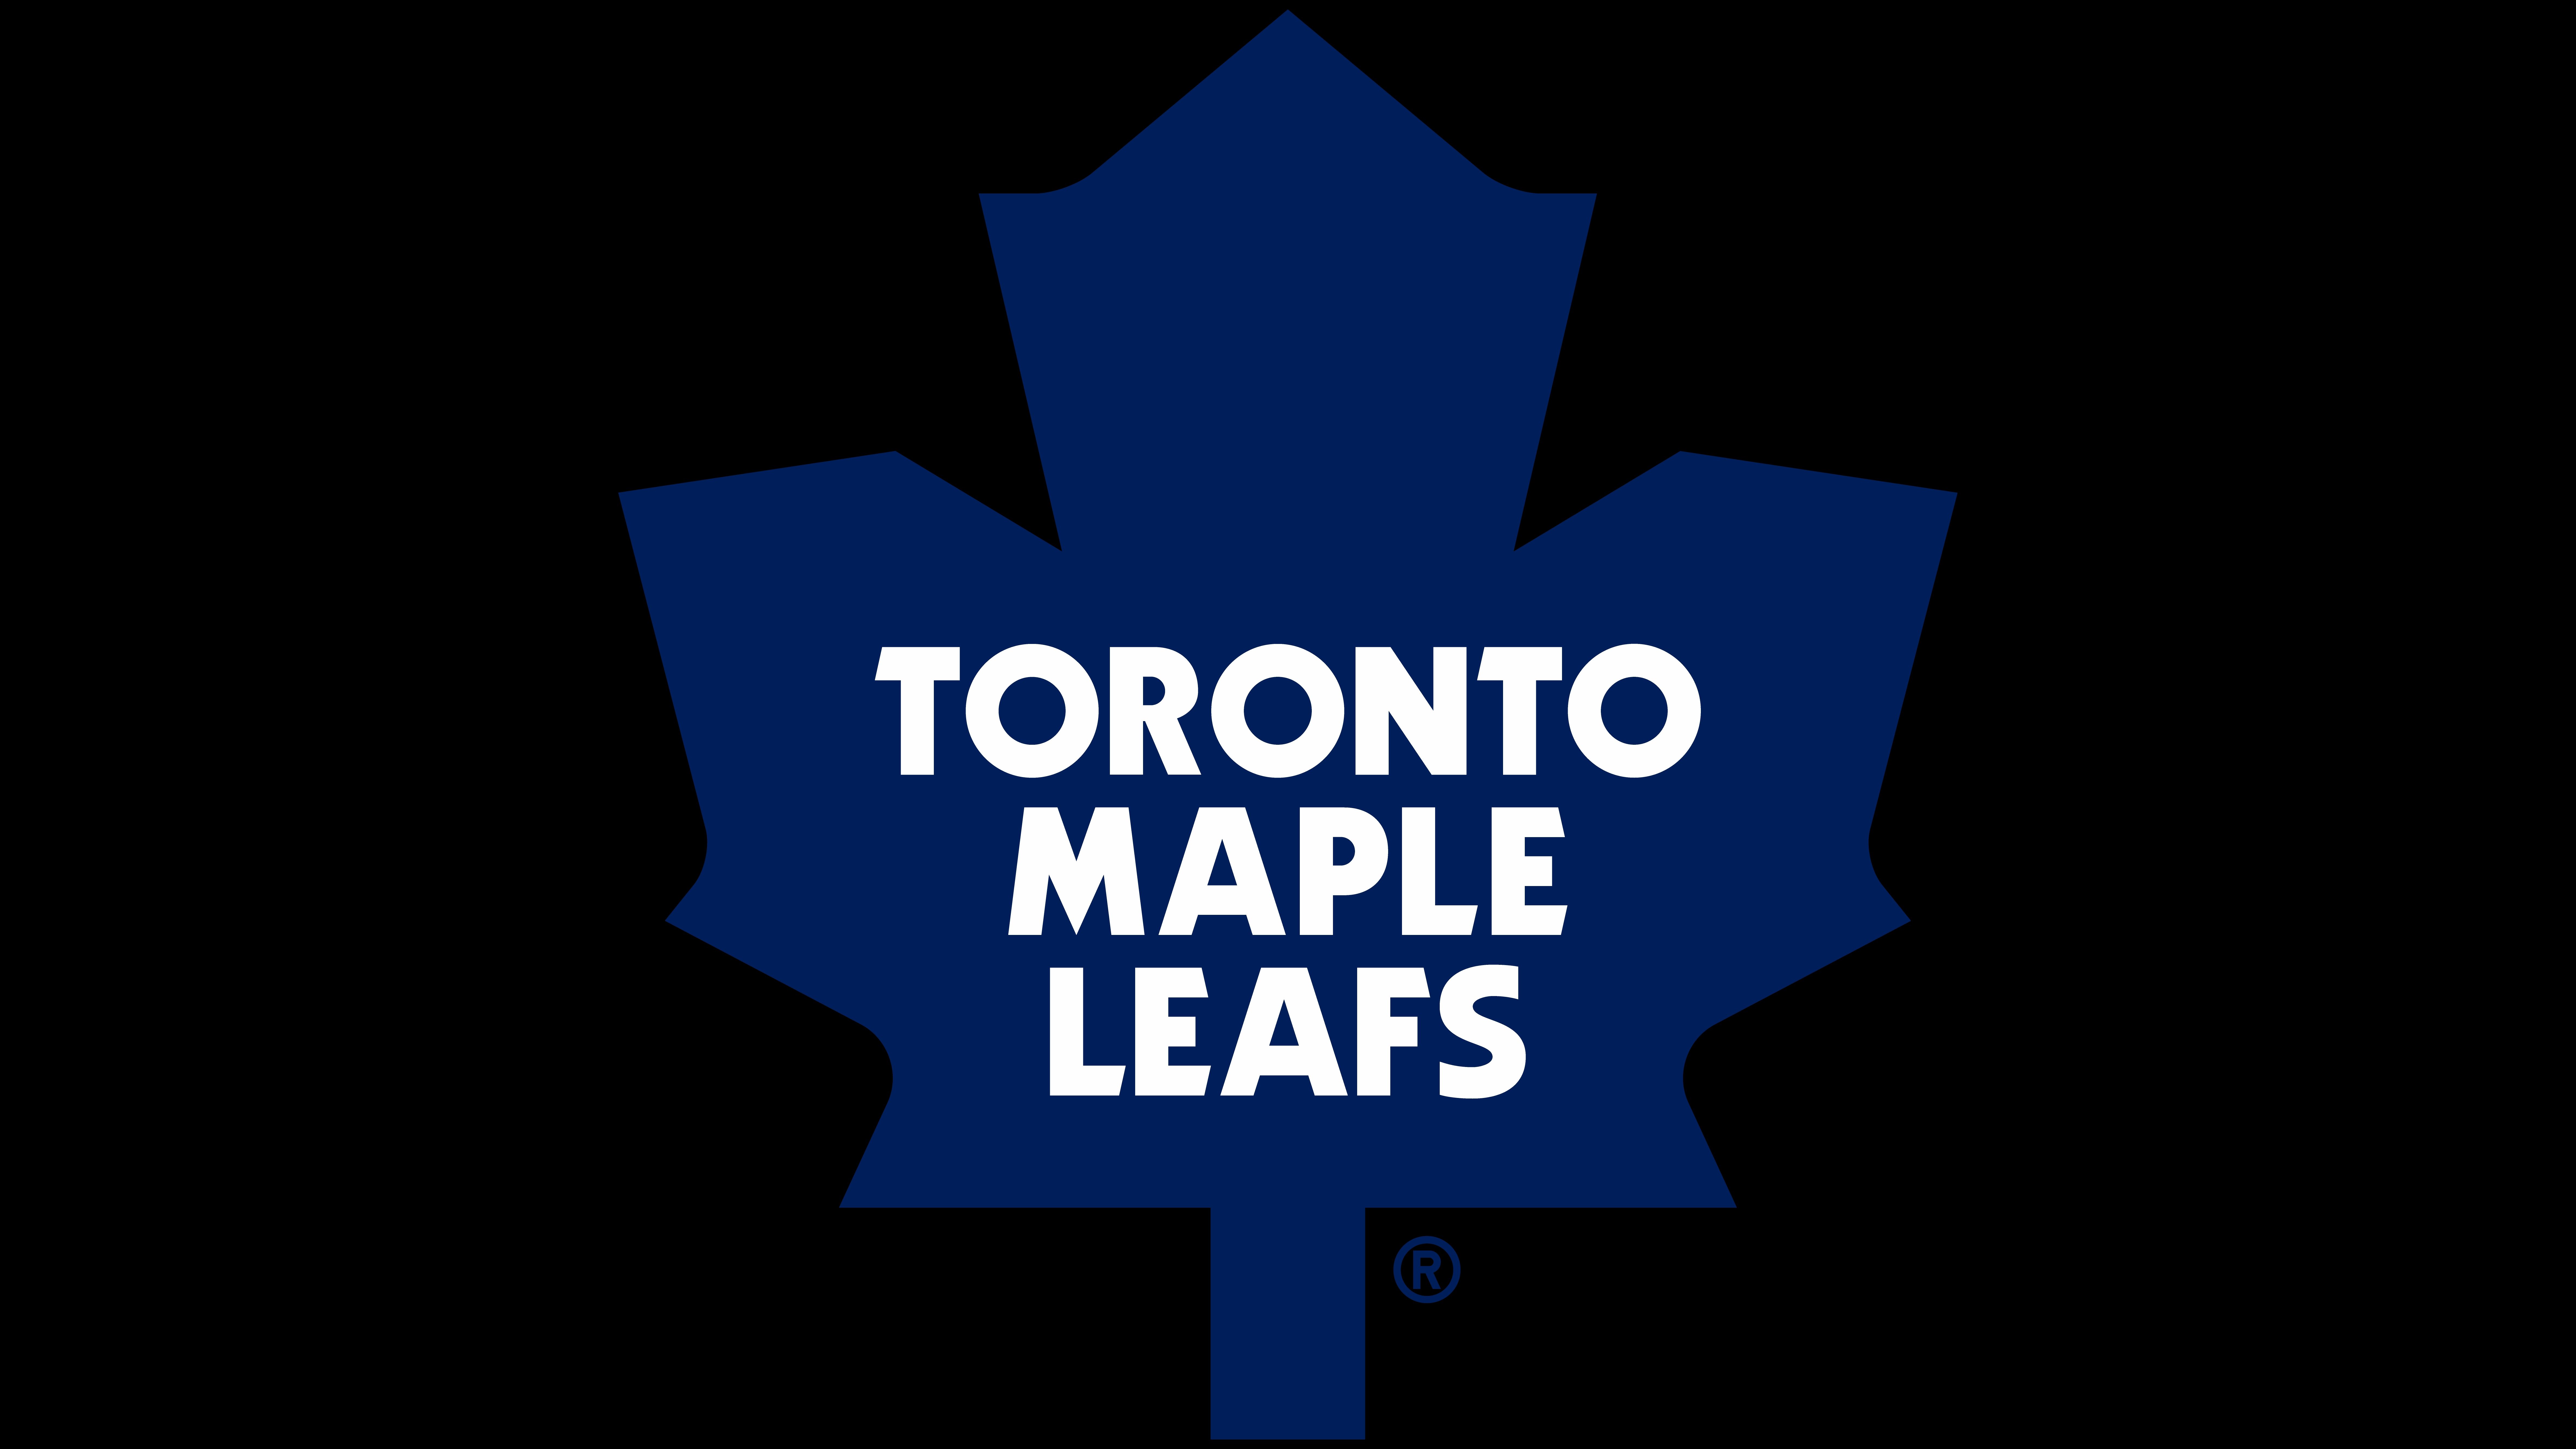 10 Toronto Maple Leafs HD Wallpapers | Backgrounds - Wallpaper Abyss